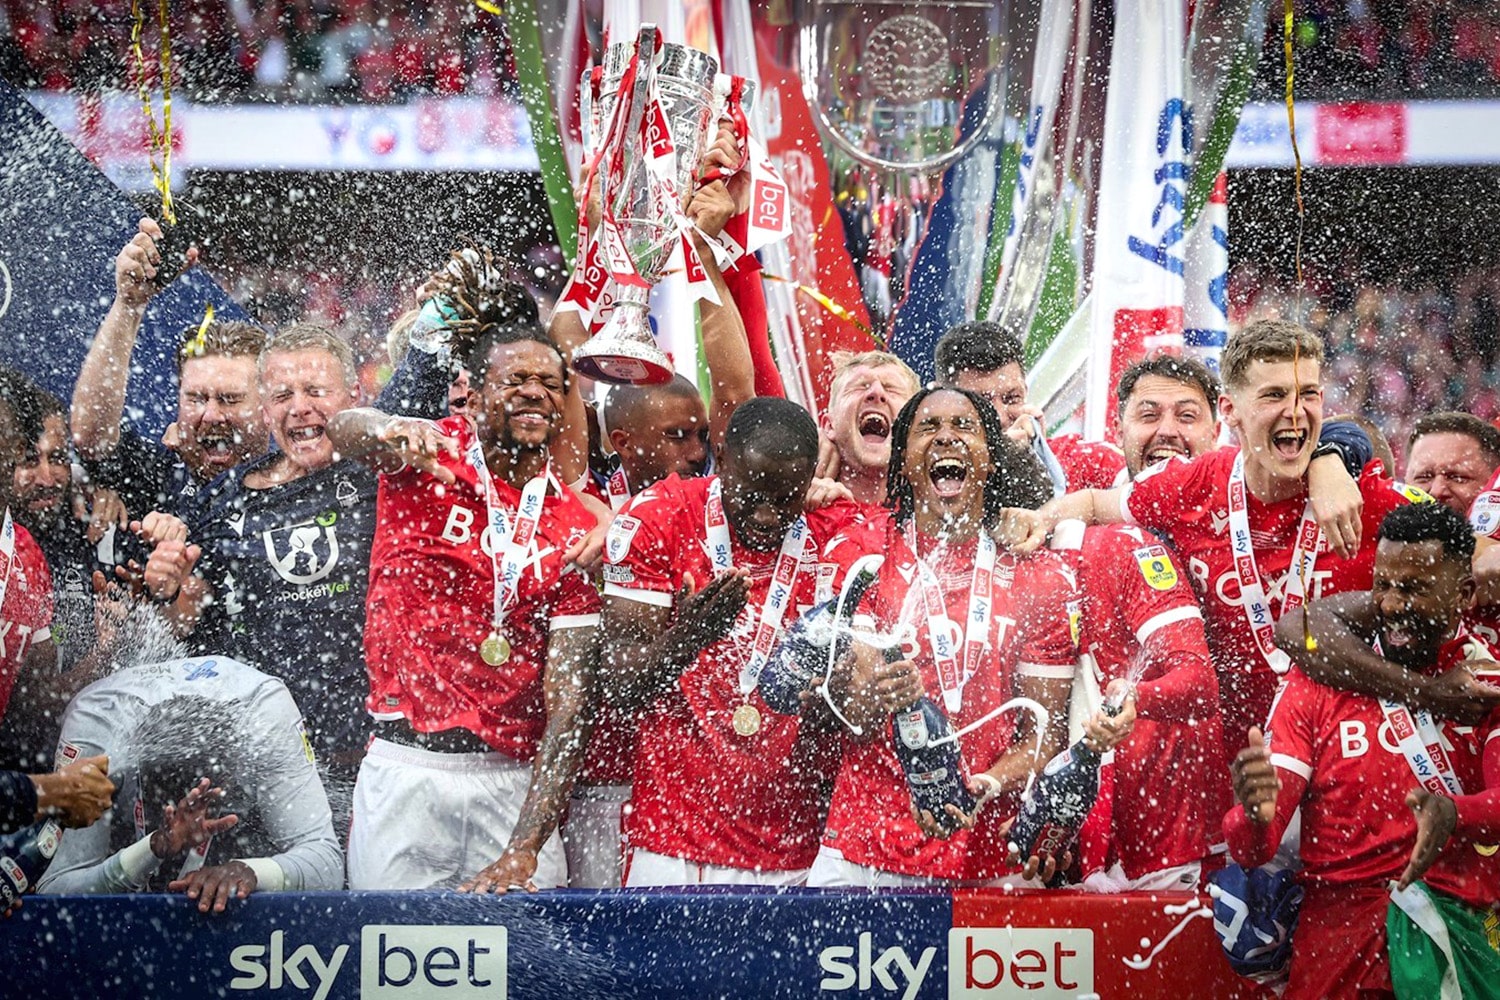 August TV selections confirmed - The English Football League